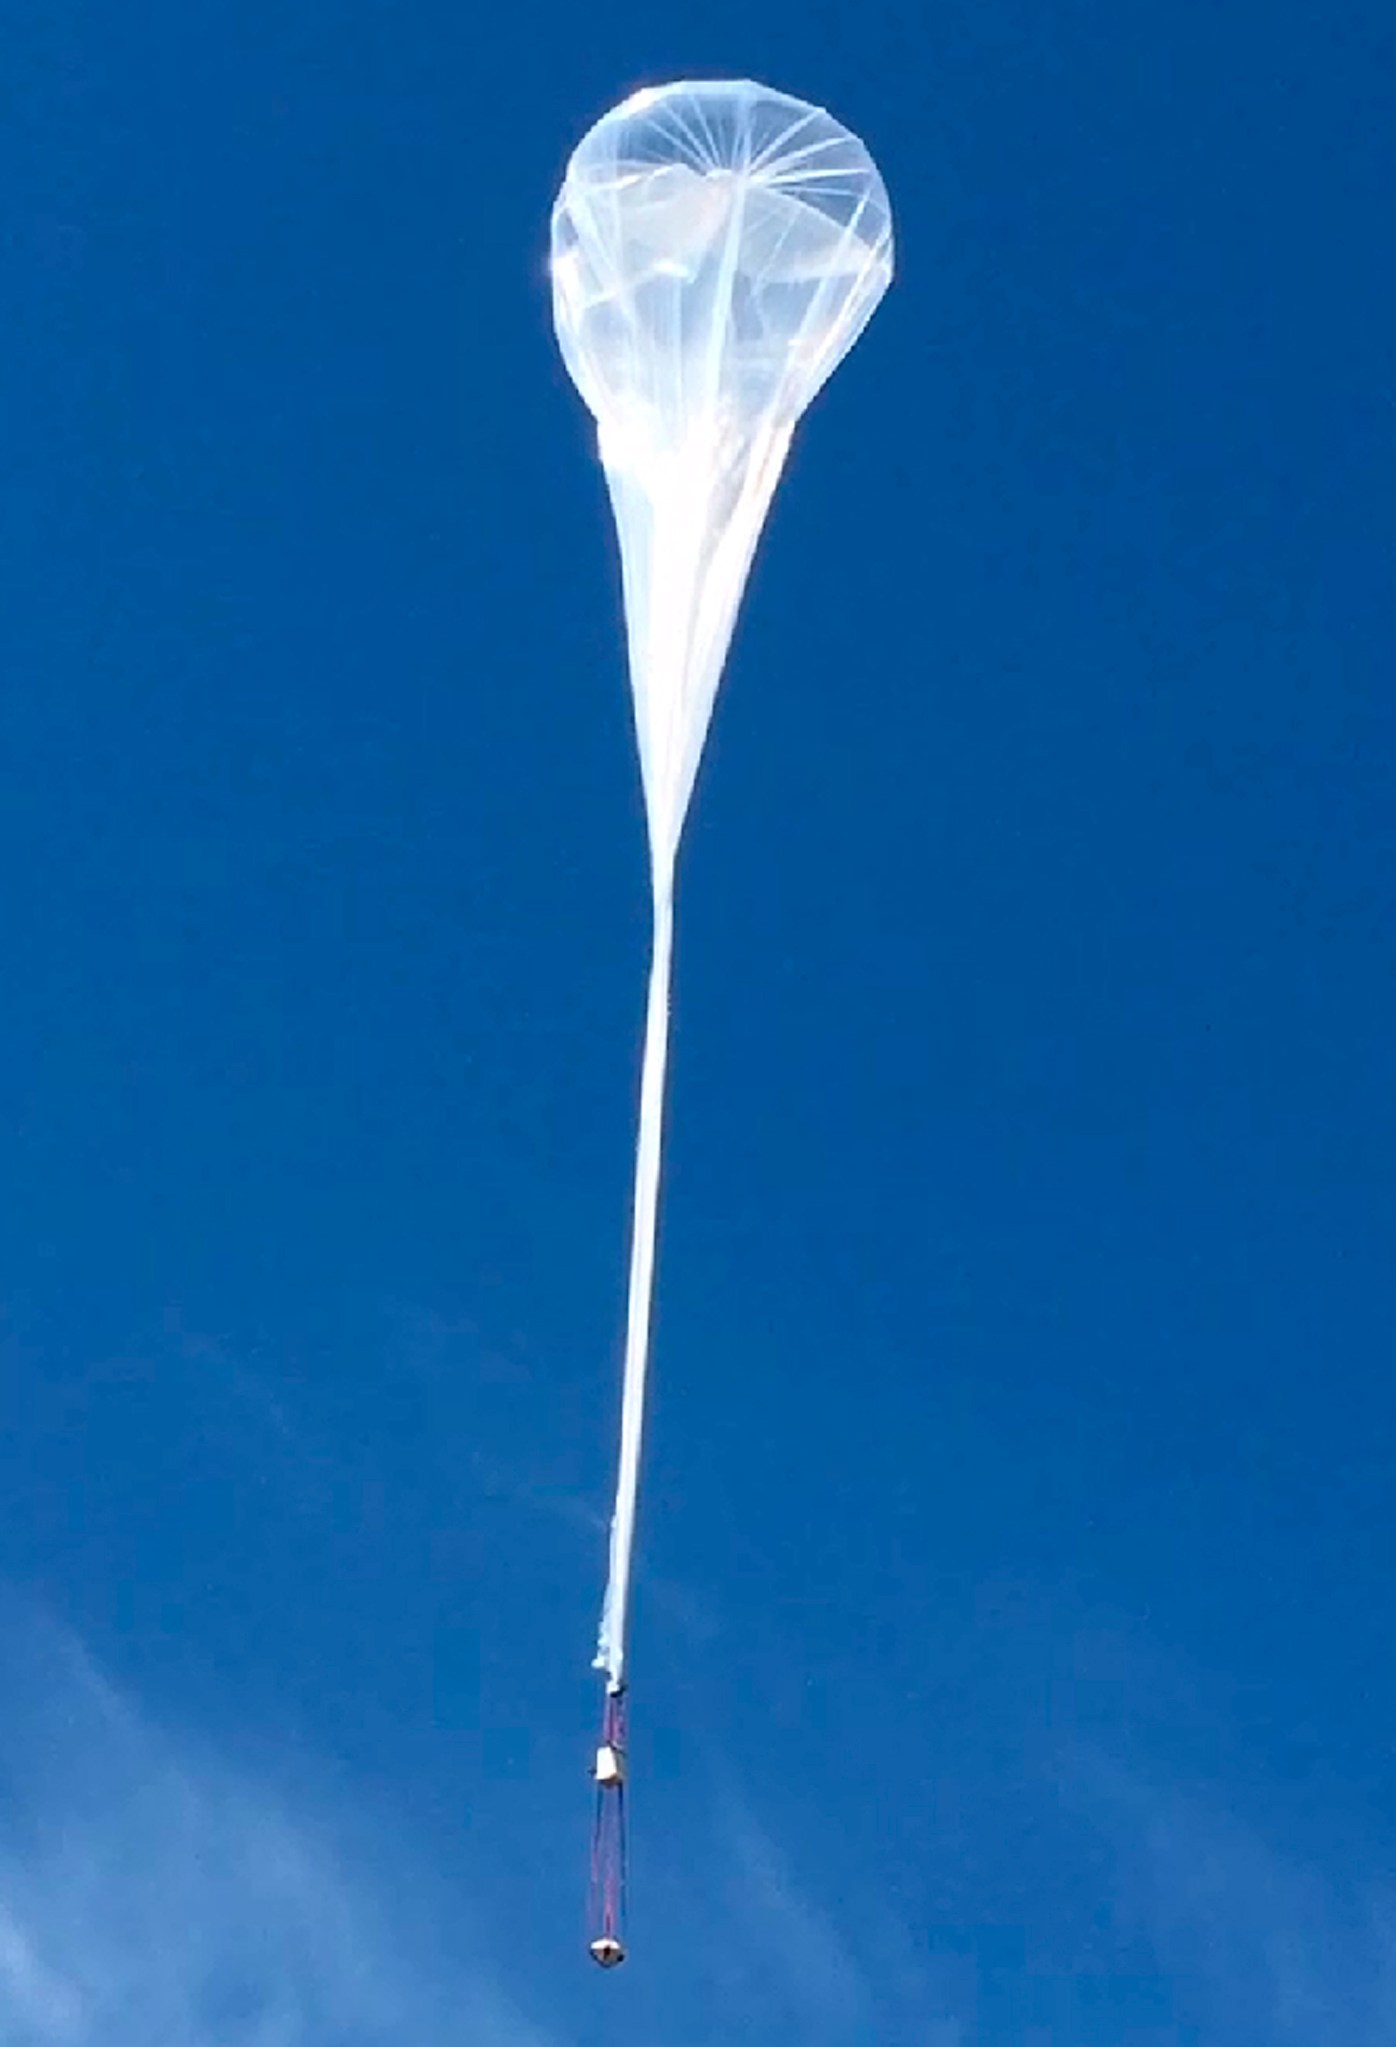 High-altitude balloon lifts space reentry capsule for flight test.